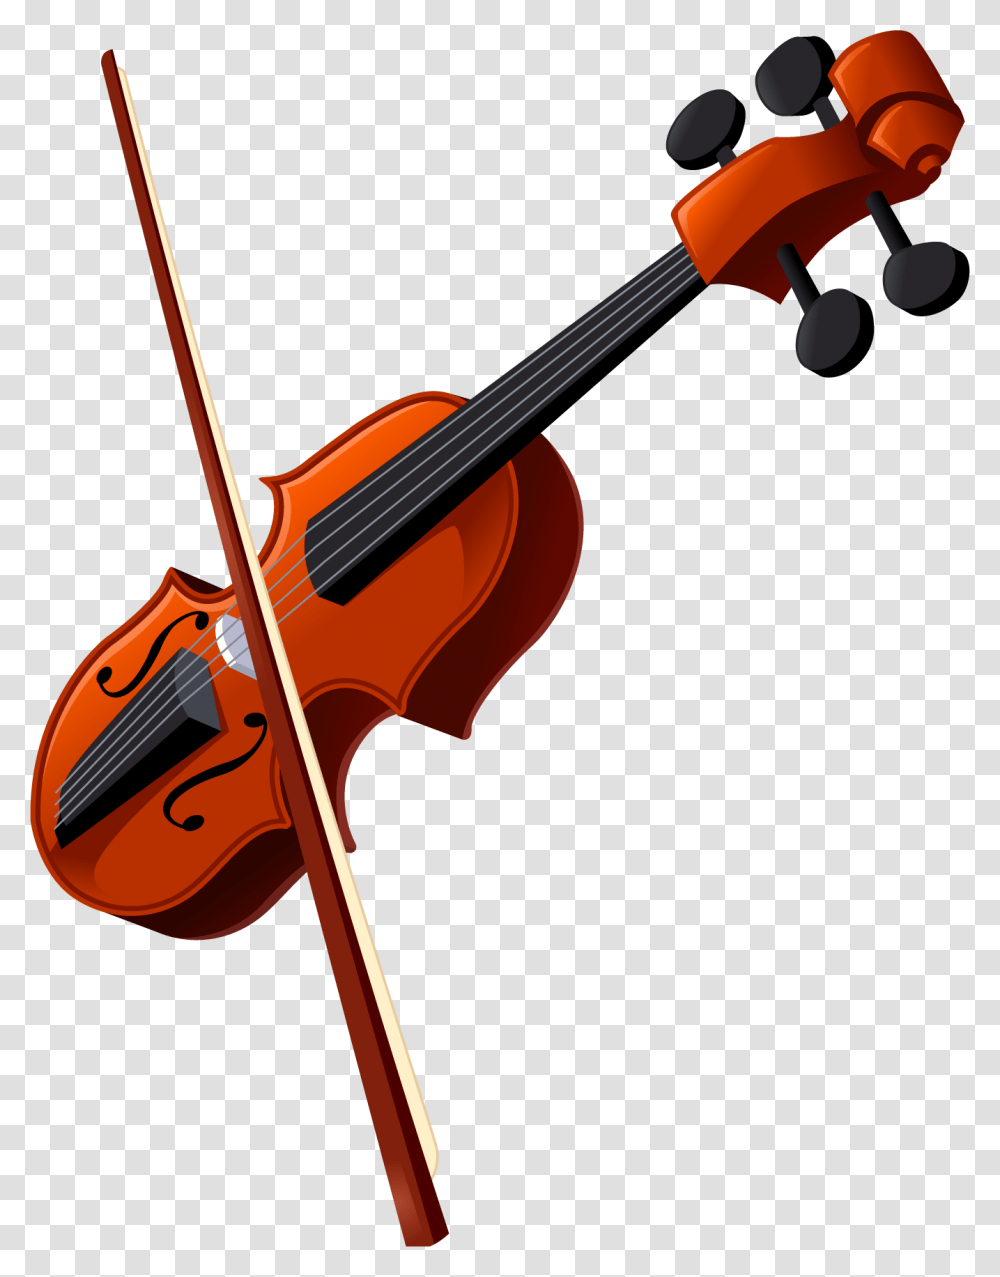 Violin Free Images Only, Leisure Activities, Musical Instrument, Fiddle, Viola Transparent Png